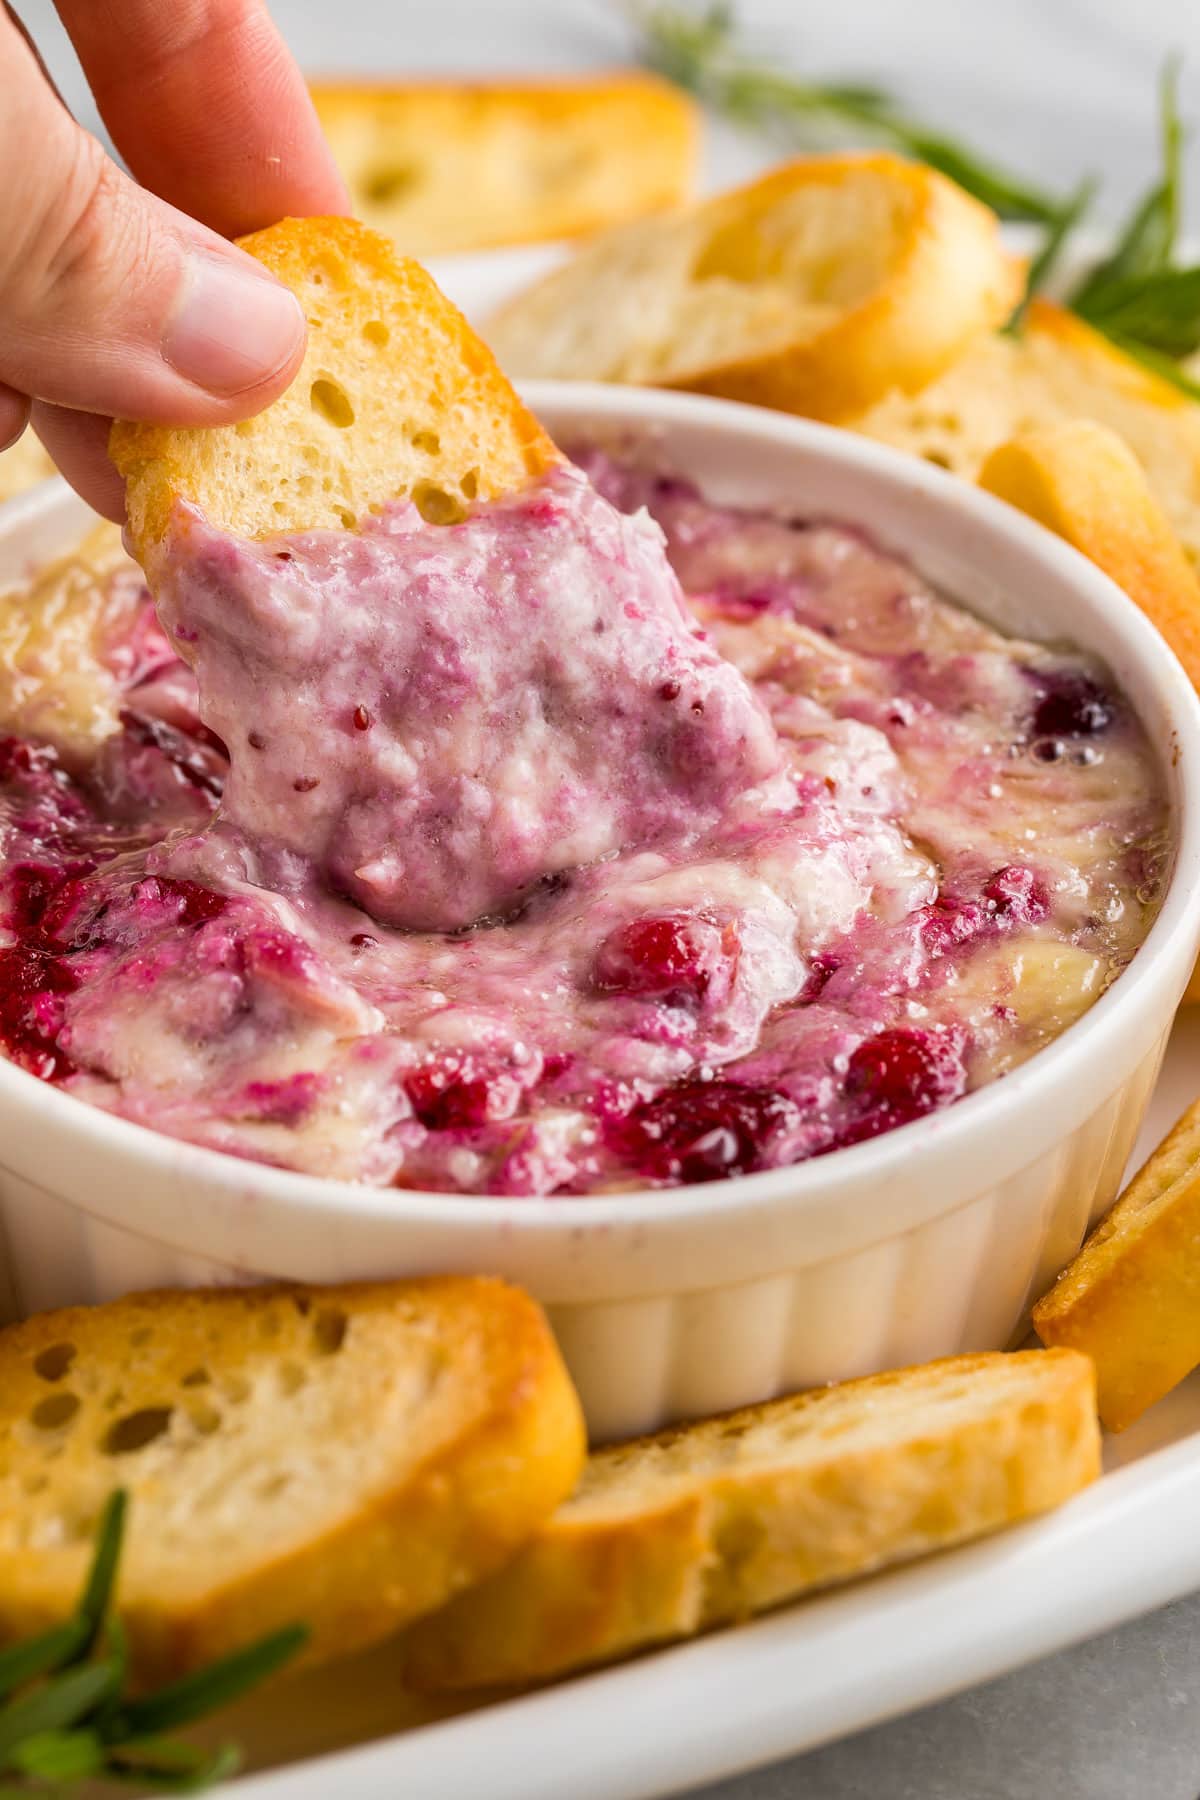 A white woman's hand holding a crostini and using it to scoop cranberry brie dip out of a ramekin.